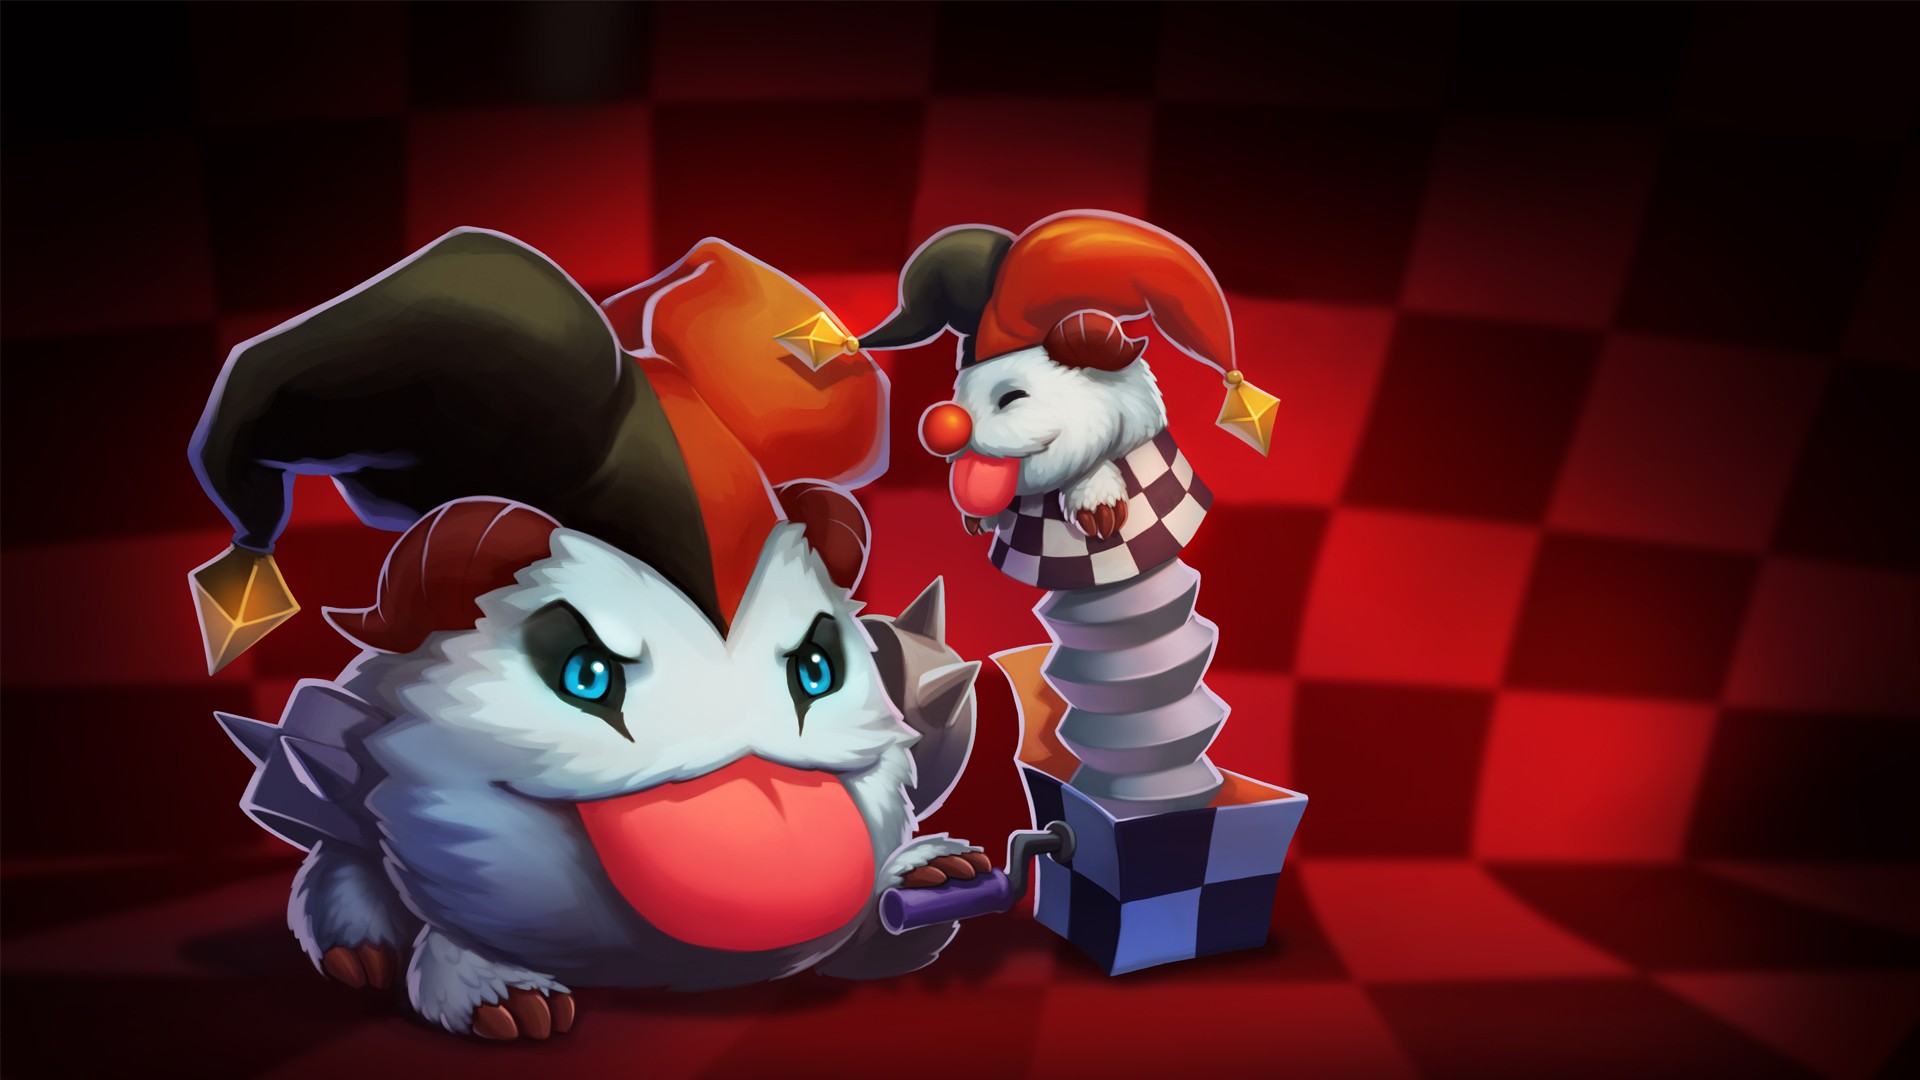 General 1920x1080 League of Legends Shaco (League of Legends) video game art Poro (League of Legends) PC gaming video game characters